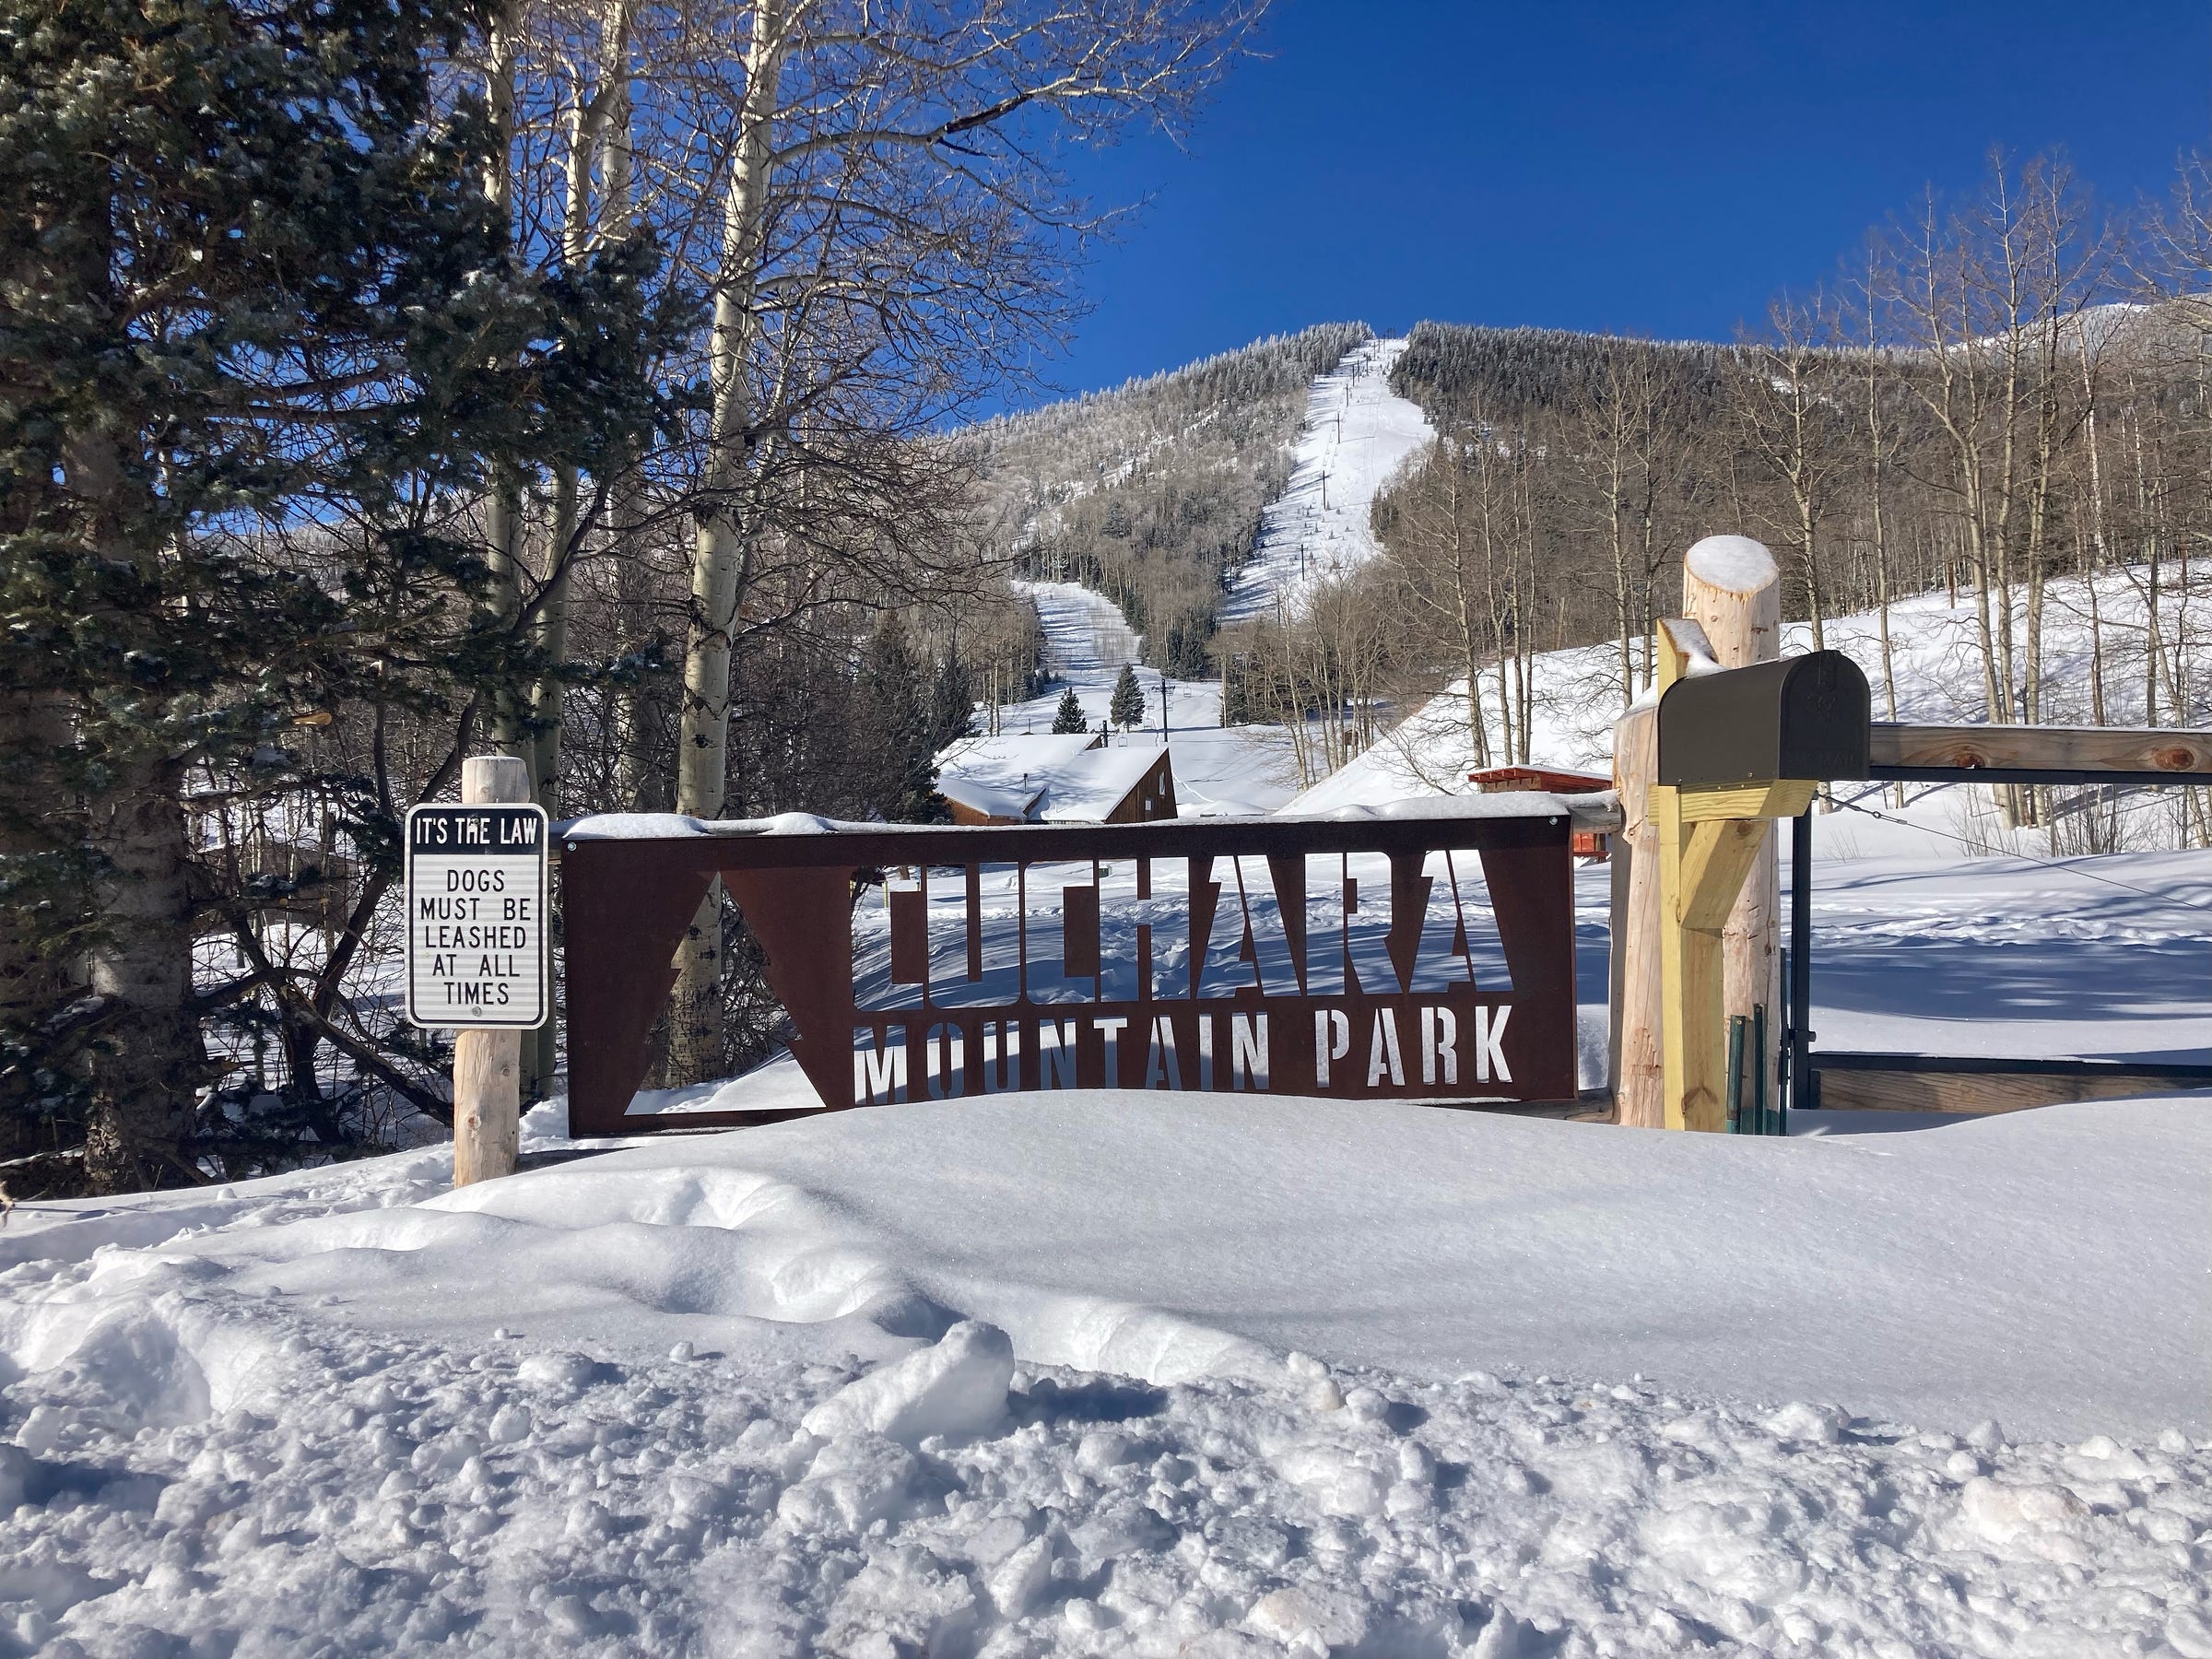 a sign reads "cuchara mountain park." in the background, a chair lift heads up the hill and out of sight.